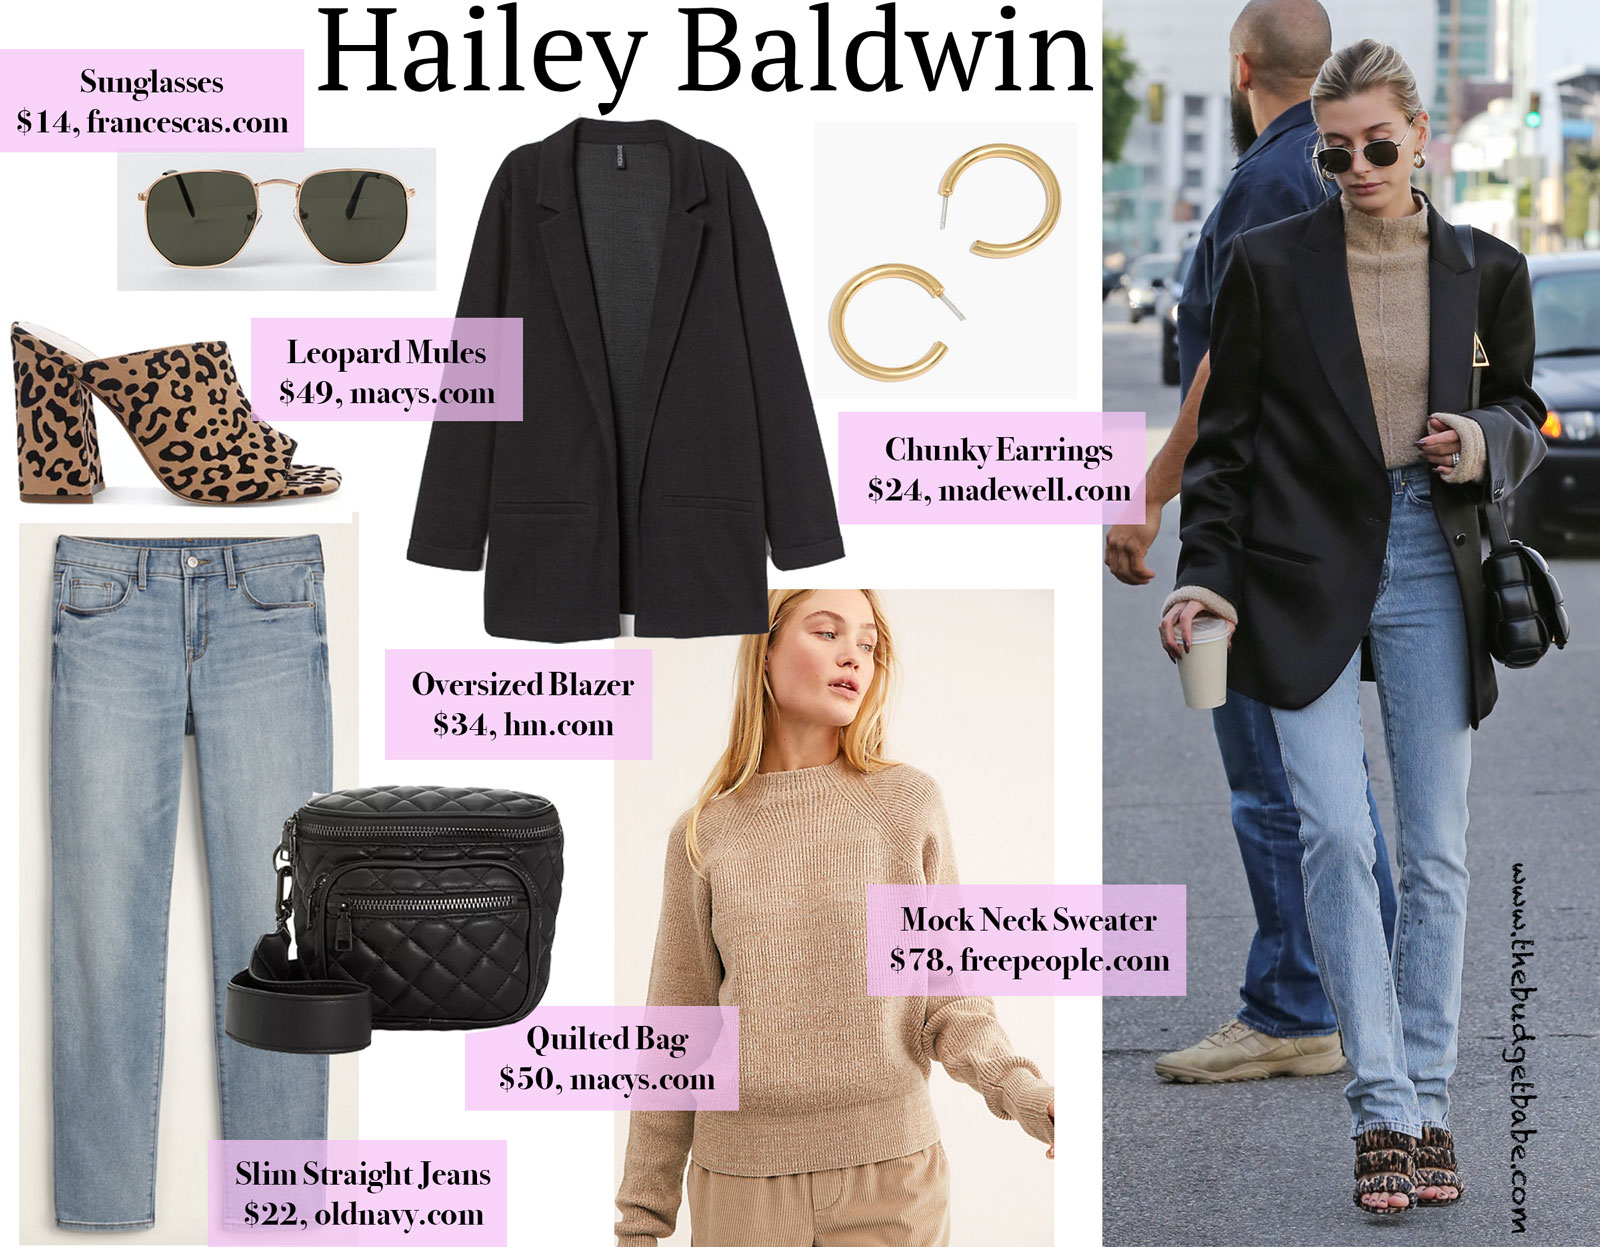 Hailey Baldwin Leopard Sandals and Tan Sweater Look for Less